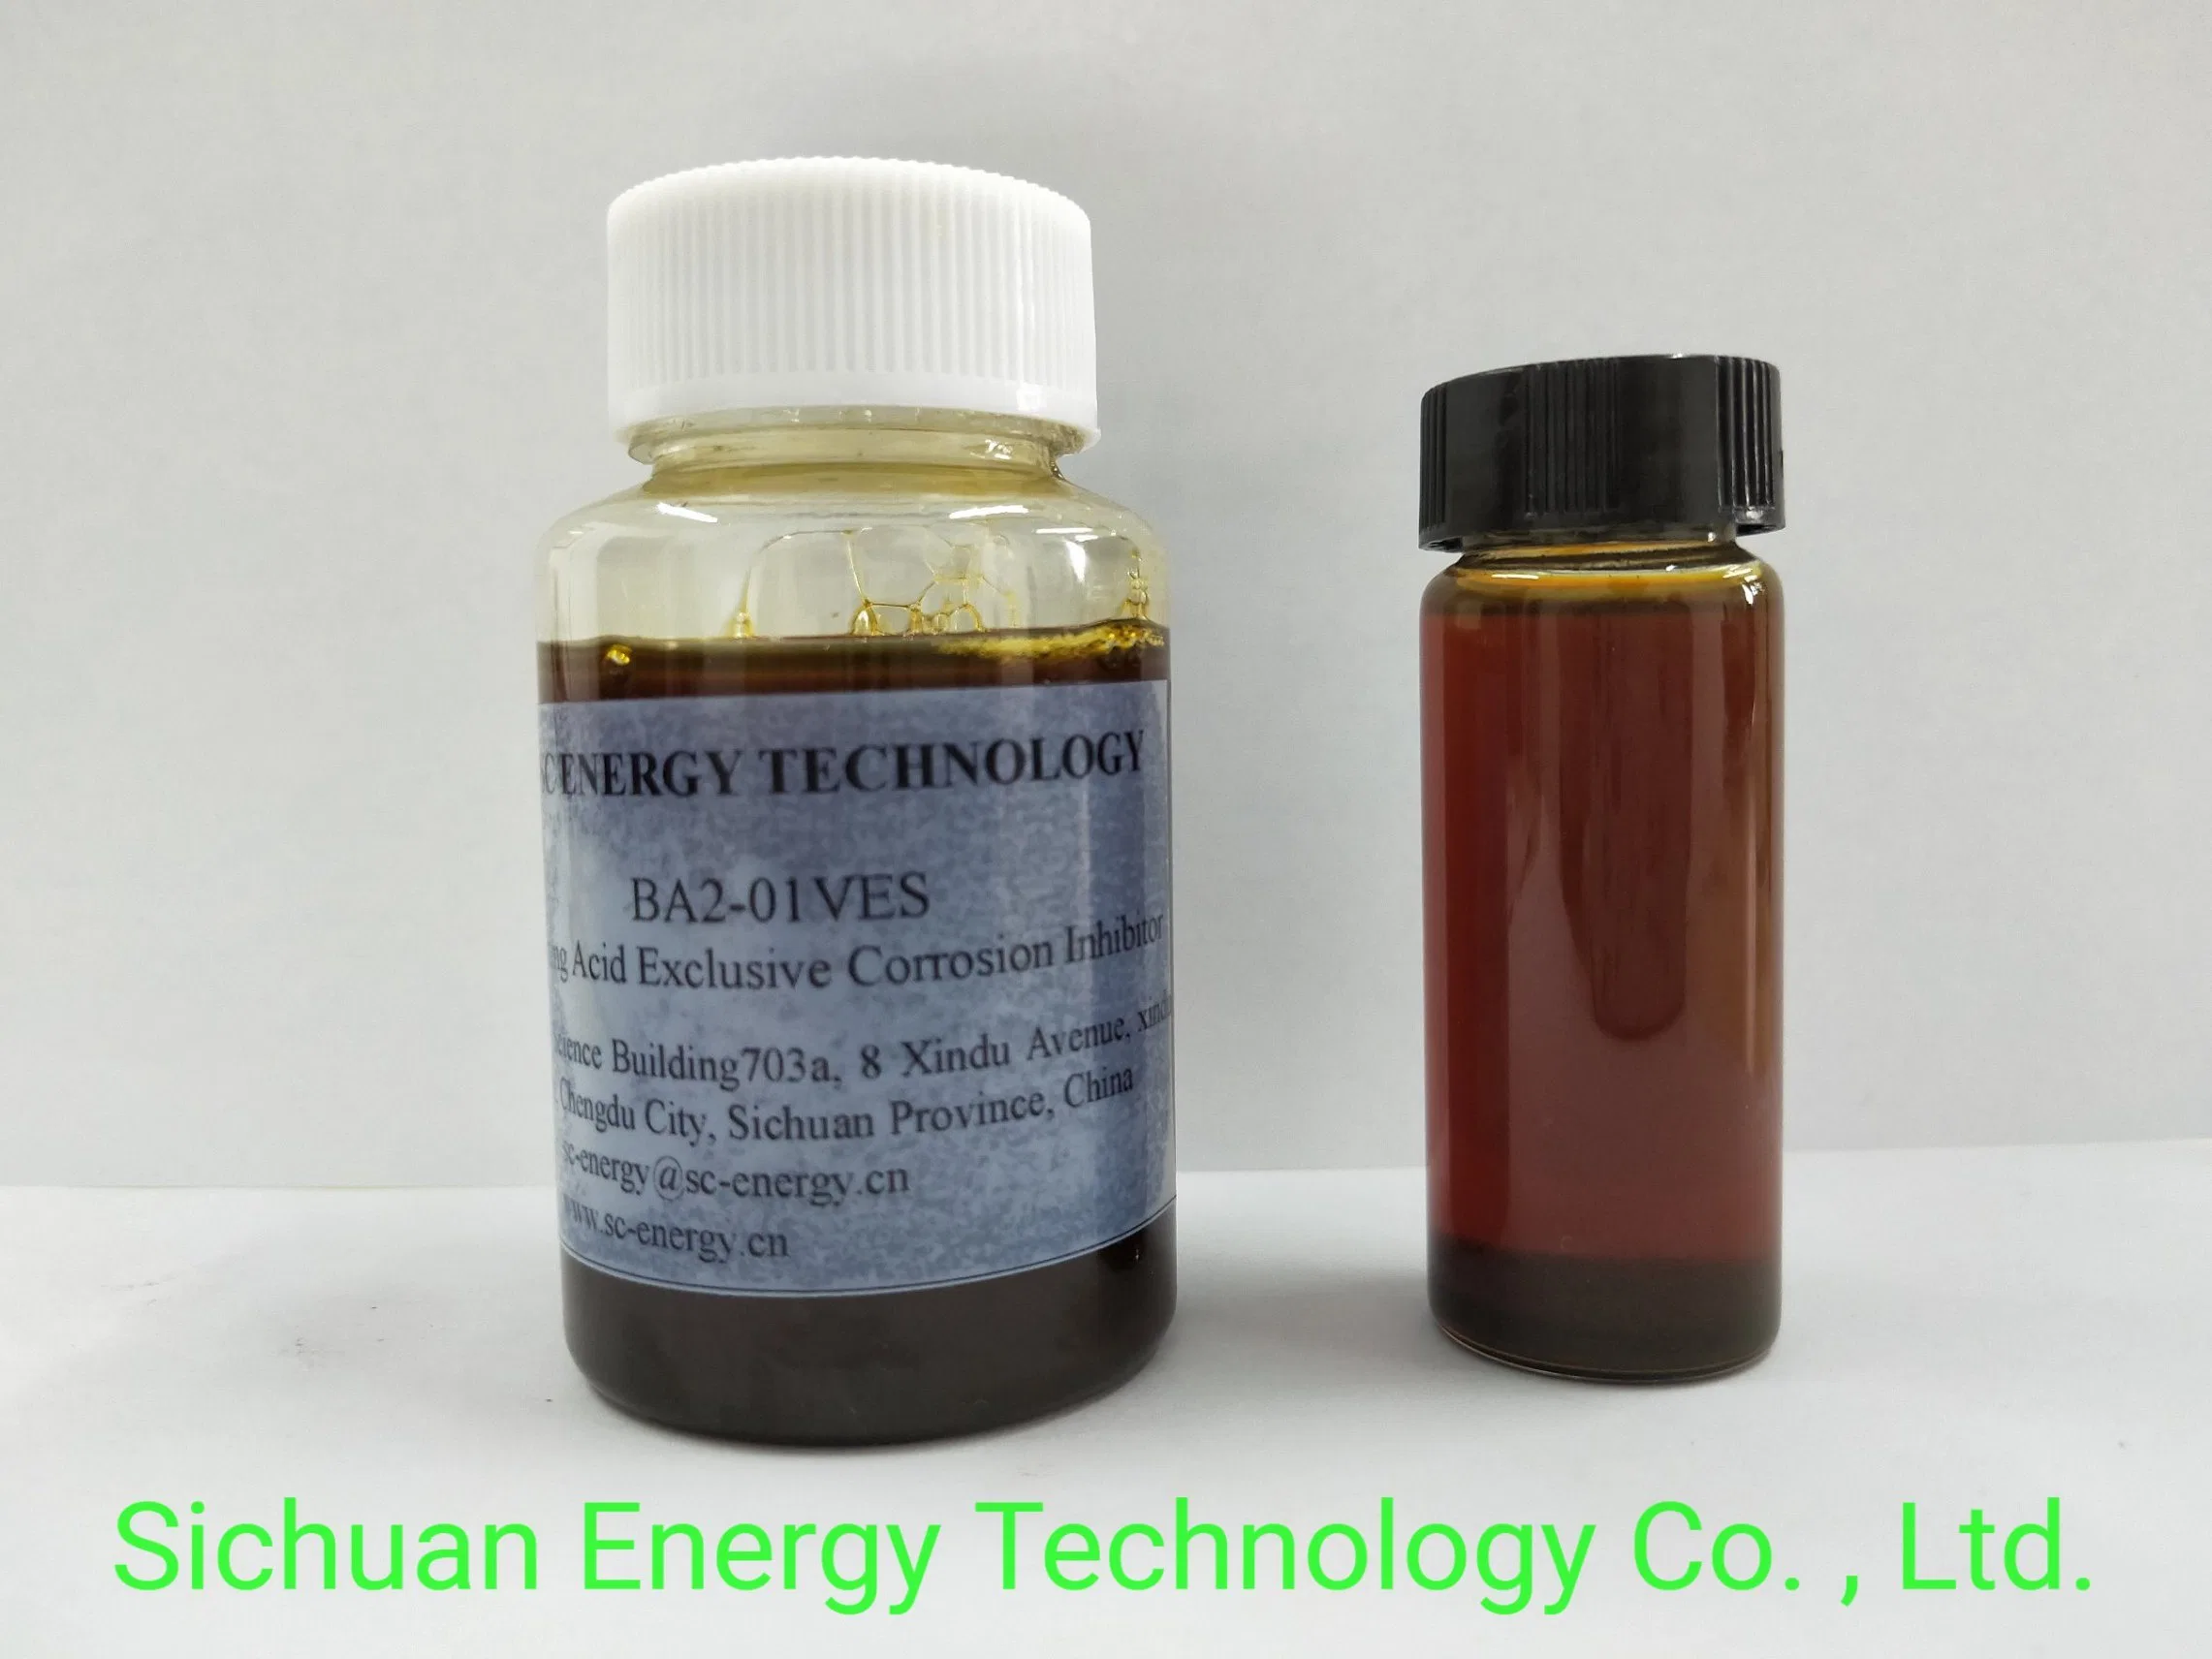 Acid Fractring Stimulation Viscoelastic Diverting (VDA) Hydrochloric Acid (HCl) Exclusive Corrosion Inhibitor Petroleum Additives- High Temperature-02